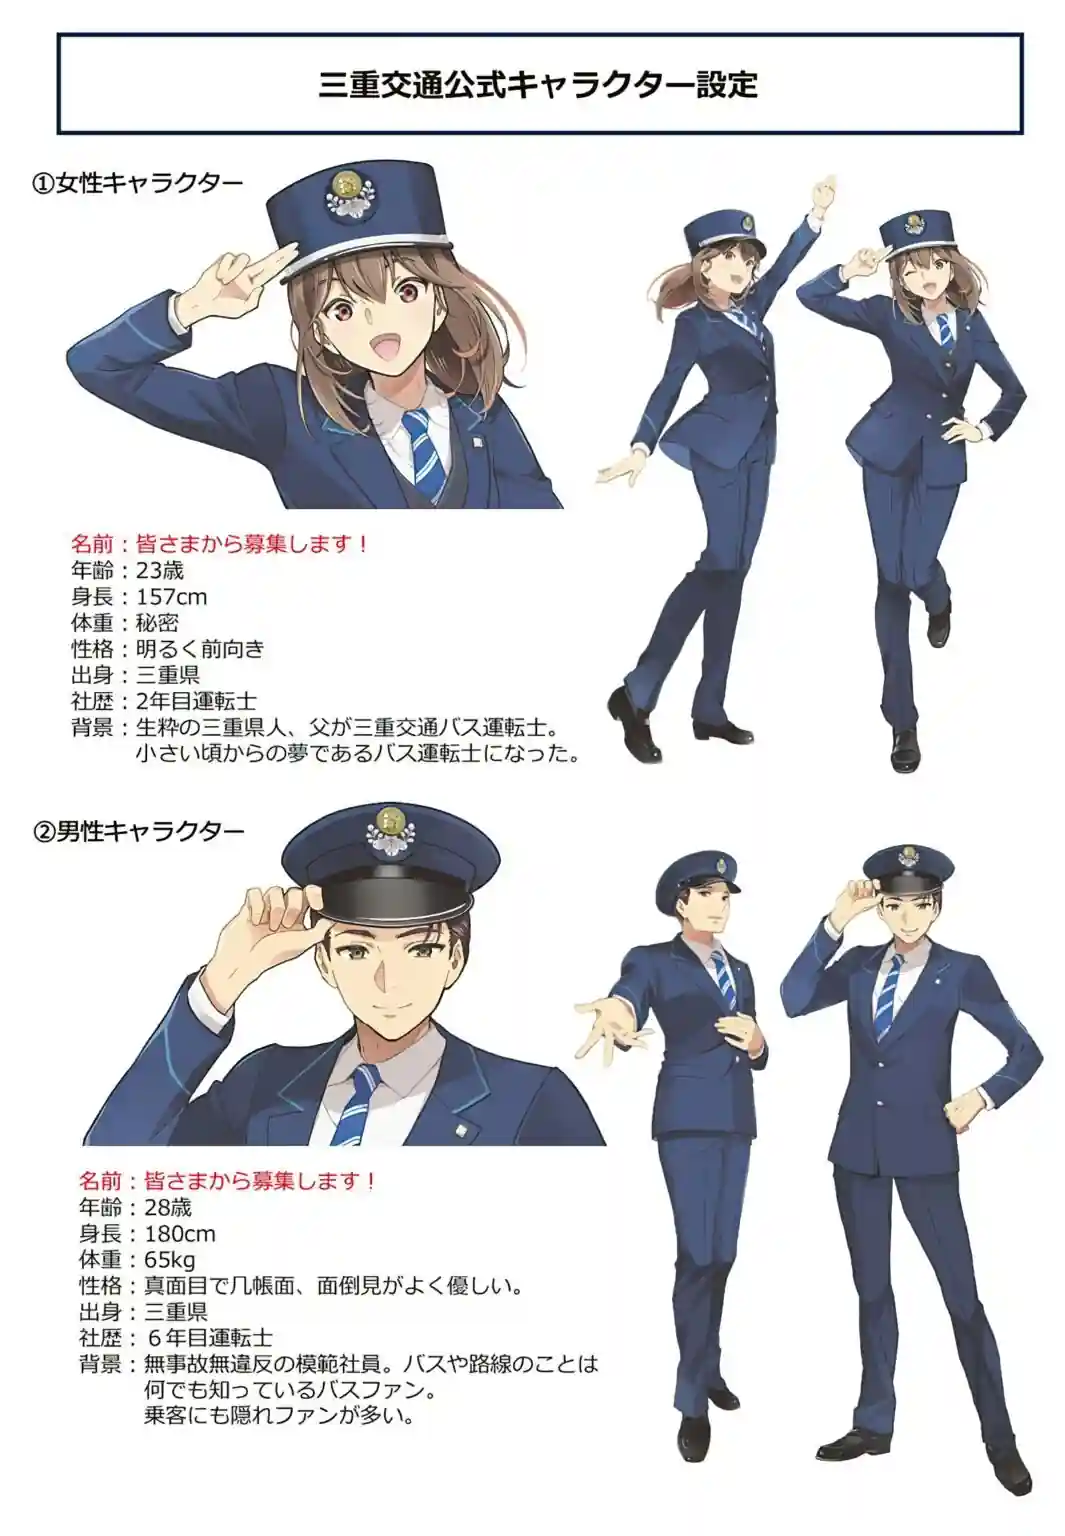 Bus company Mie Kotsu ignores complaints about its original character being too feminine